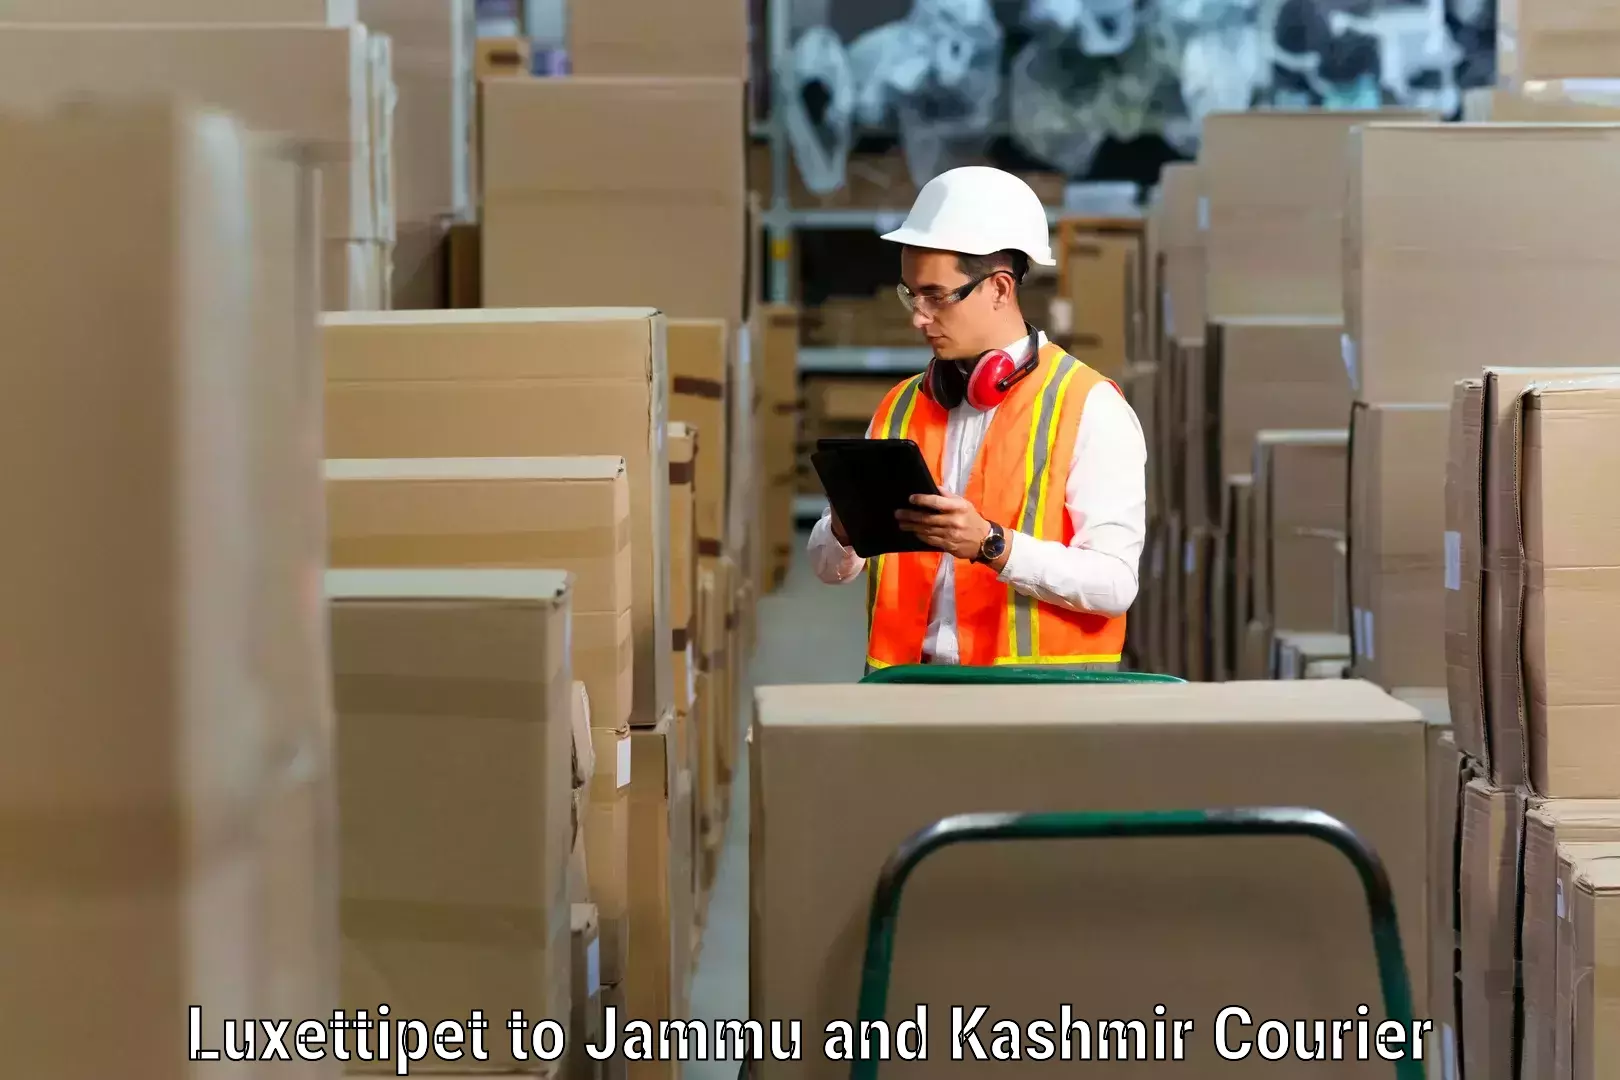 Home relocation experts Luxettipet to Srinagar Kashmir